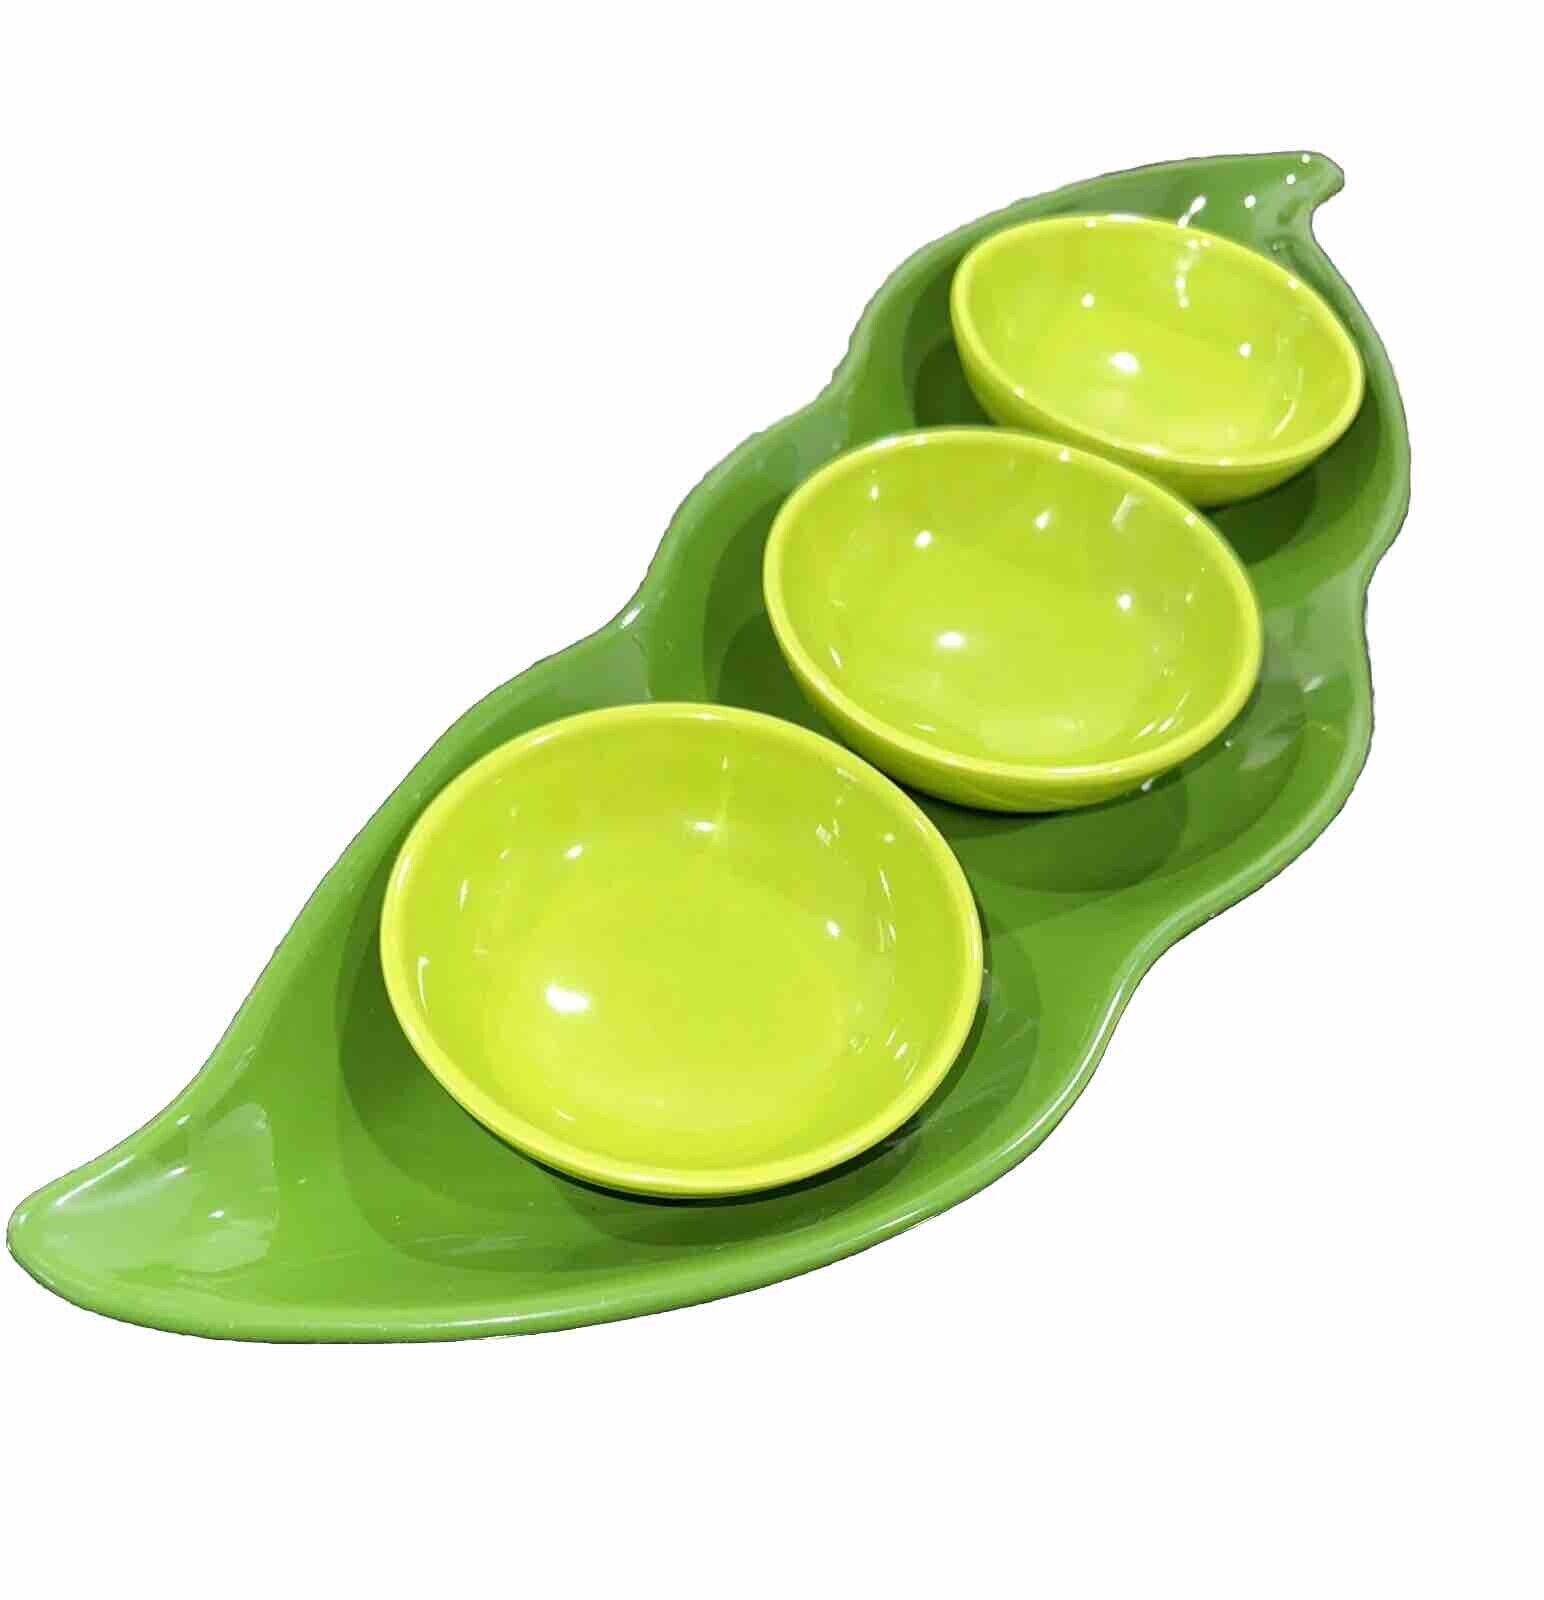  A. Santos Portugal 3 Peas in a Pod Vintage Whimsical Serving Tray & 3 Bowls